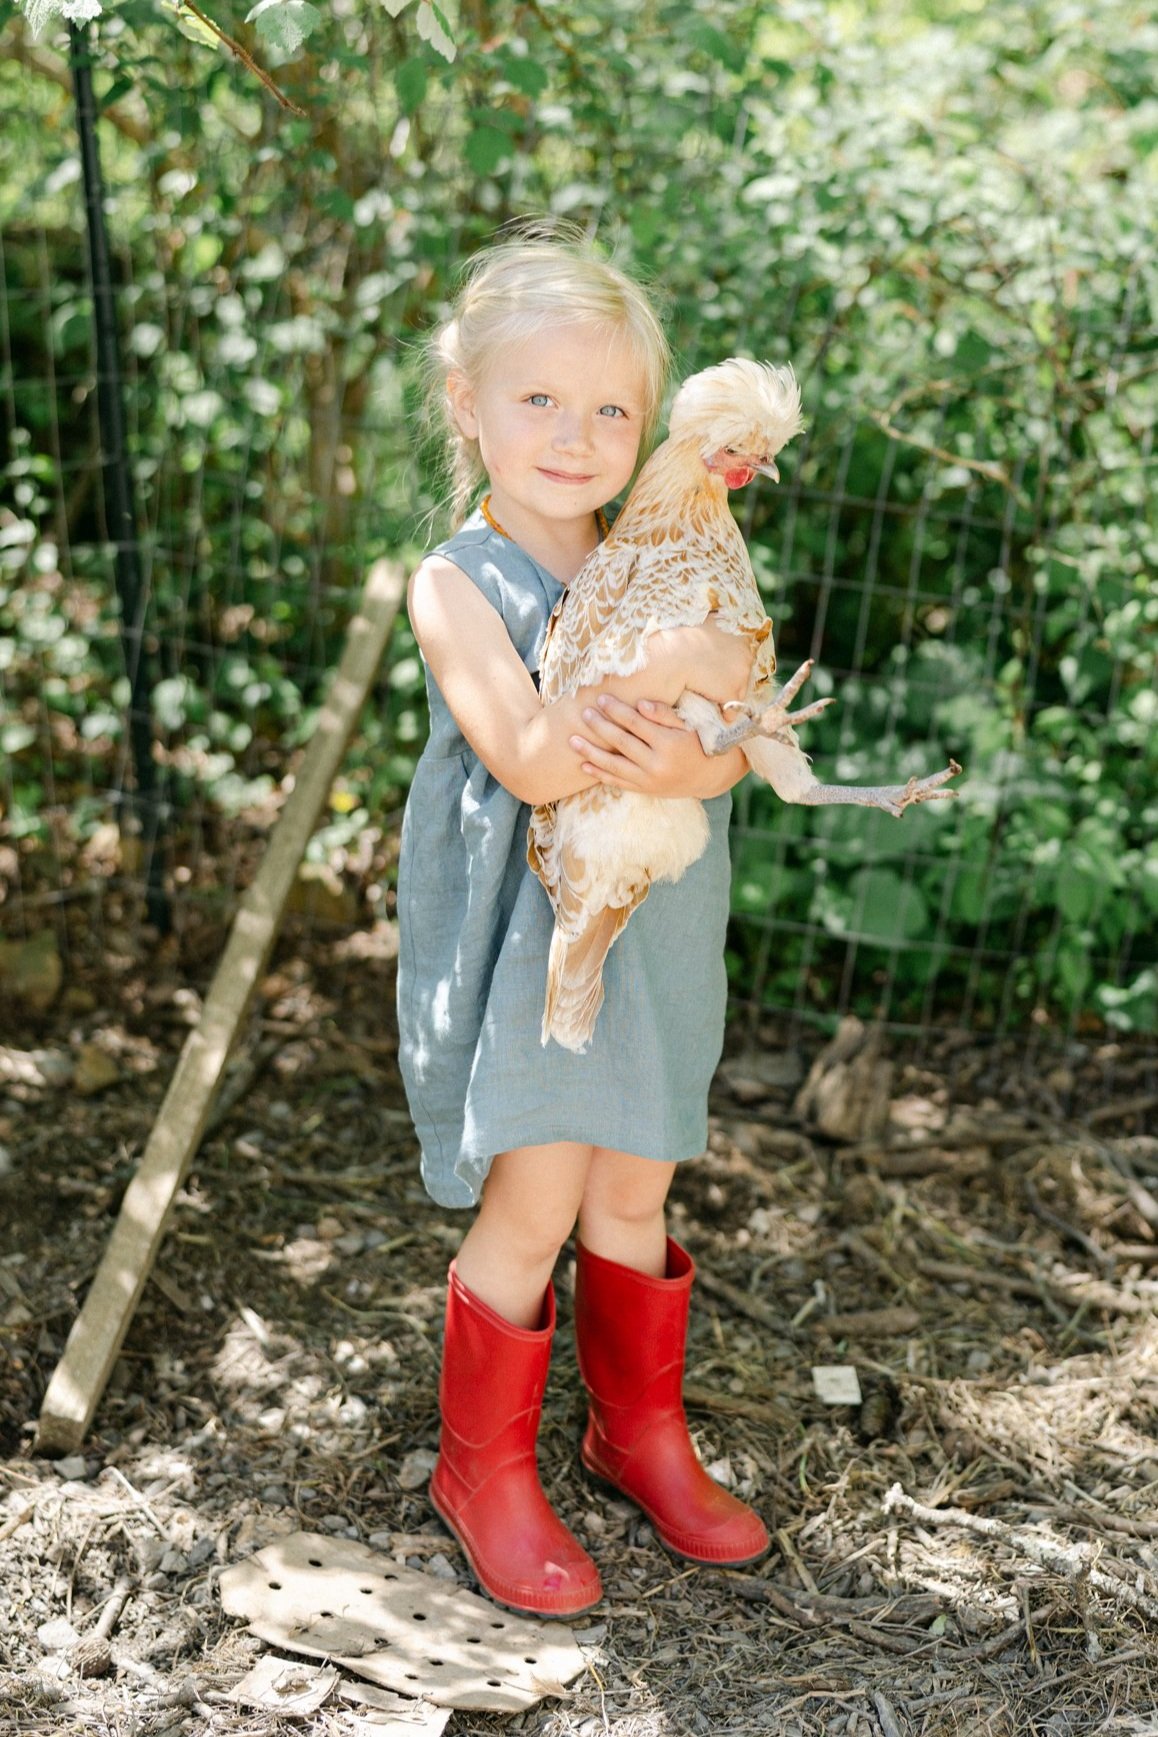 Armed with her polish chicken, a little blonde haired girl stands in her red rain boots in her Bucks County PA spring garden